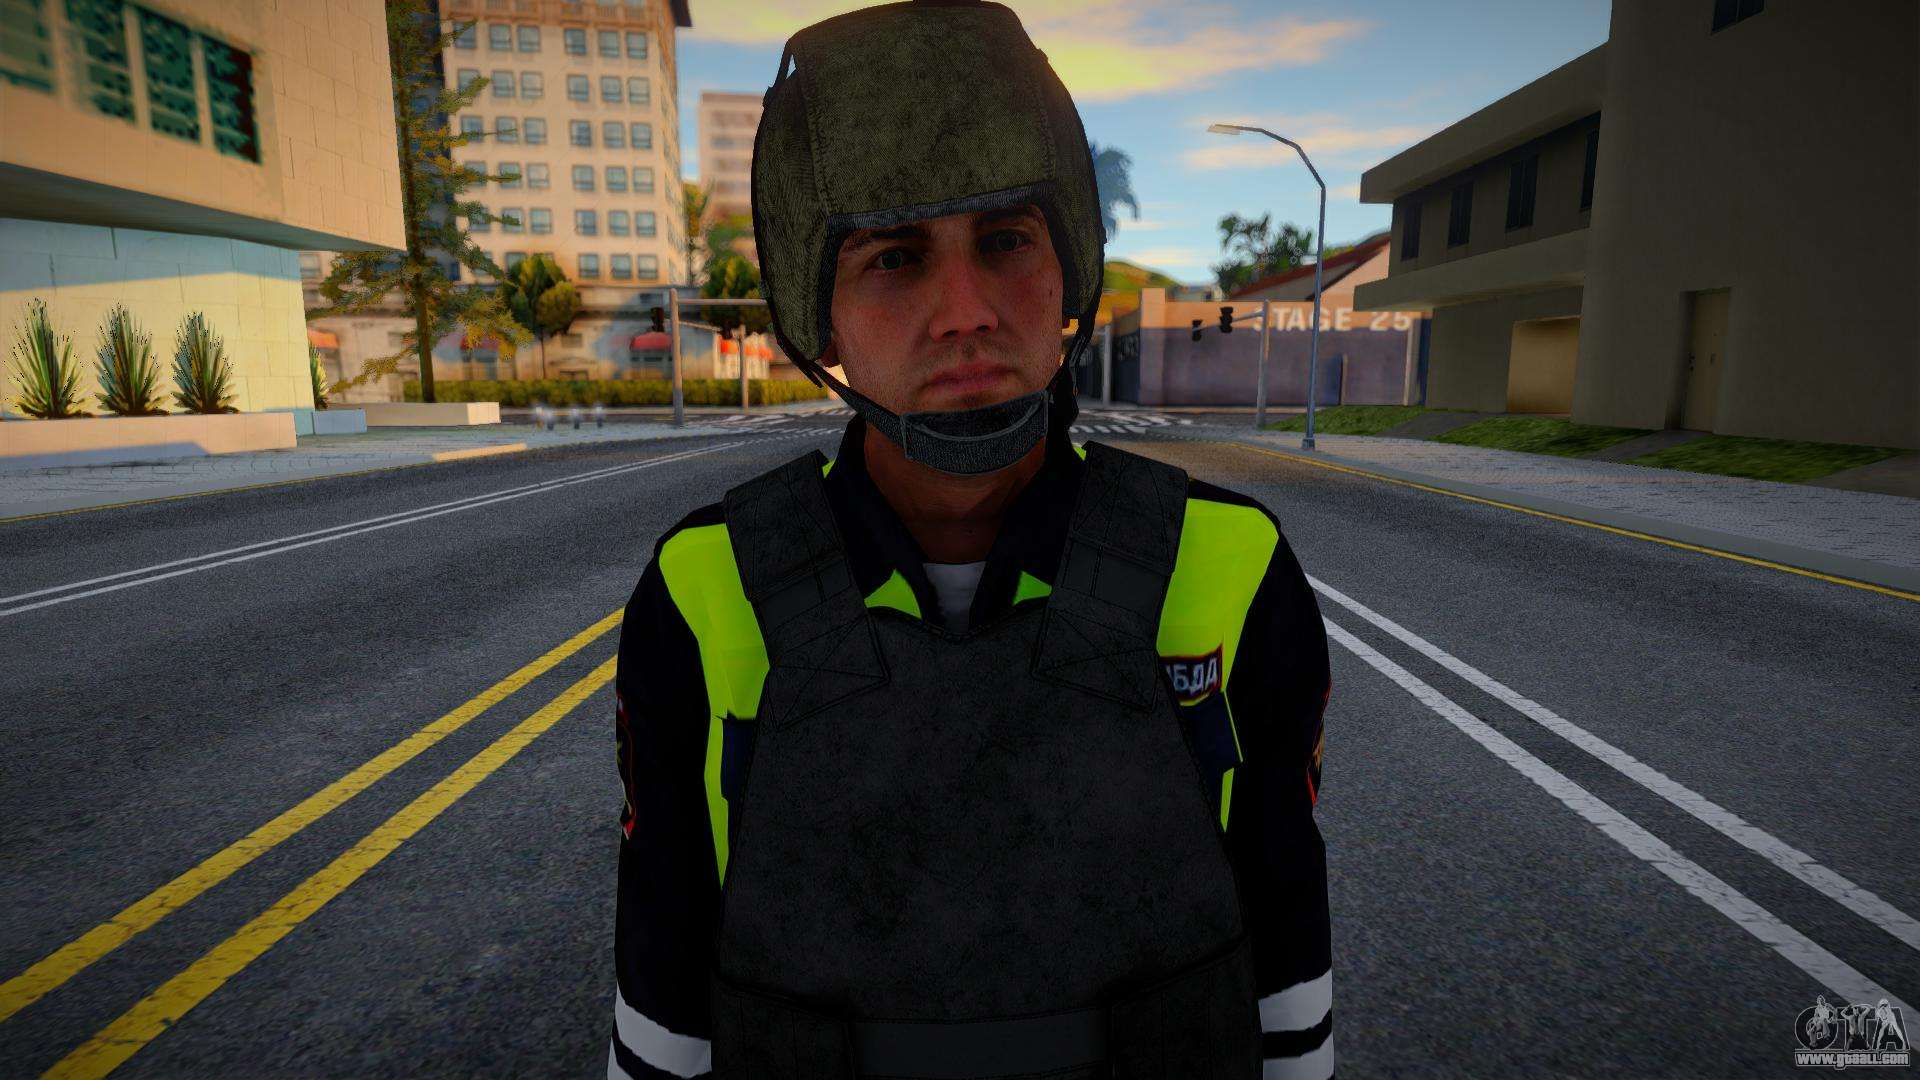 Leninism in the meantime pope Traffic Police Officer v2 for GTA San Andreas